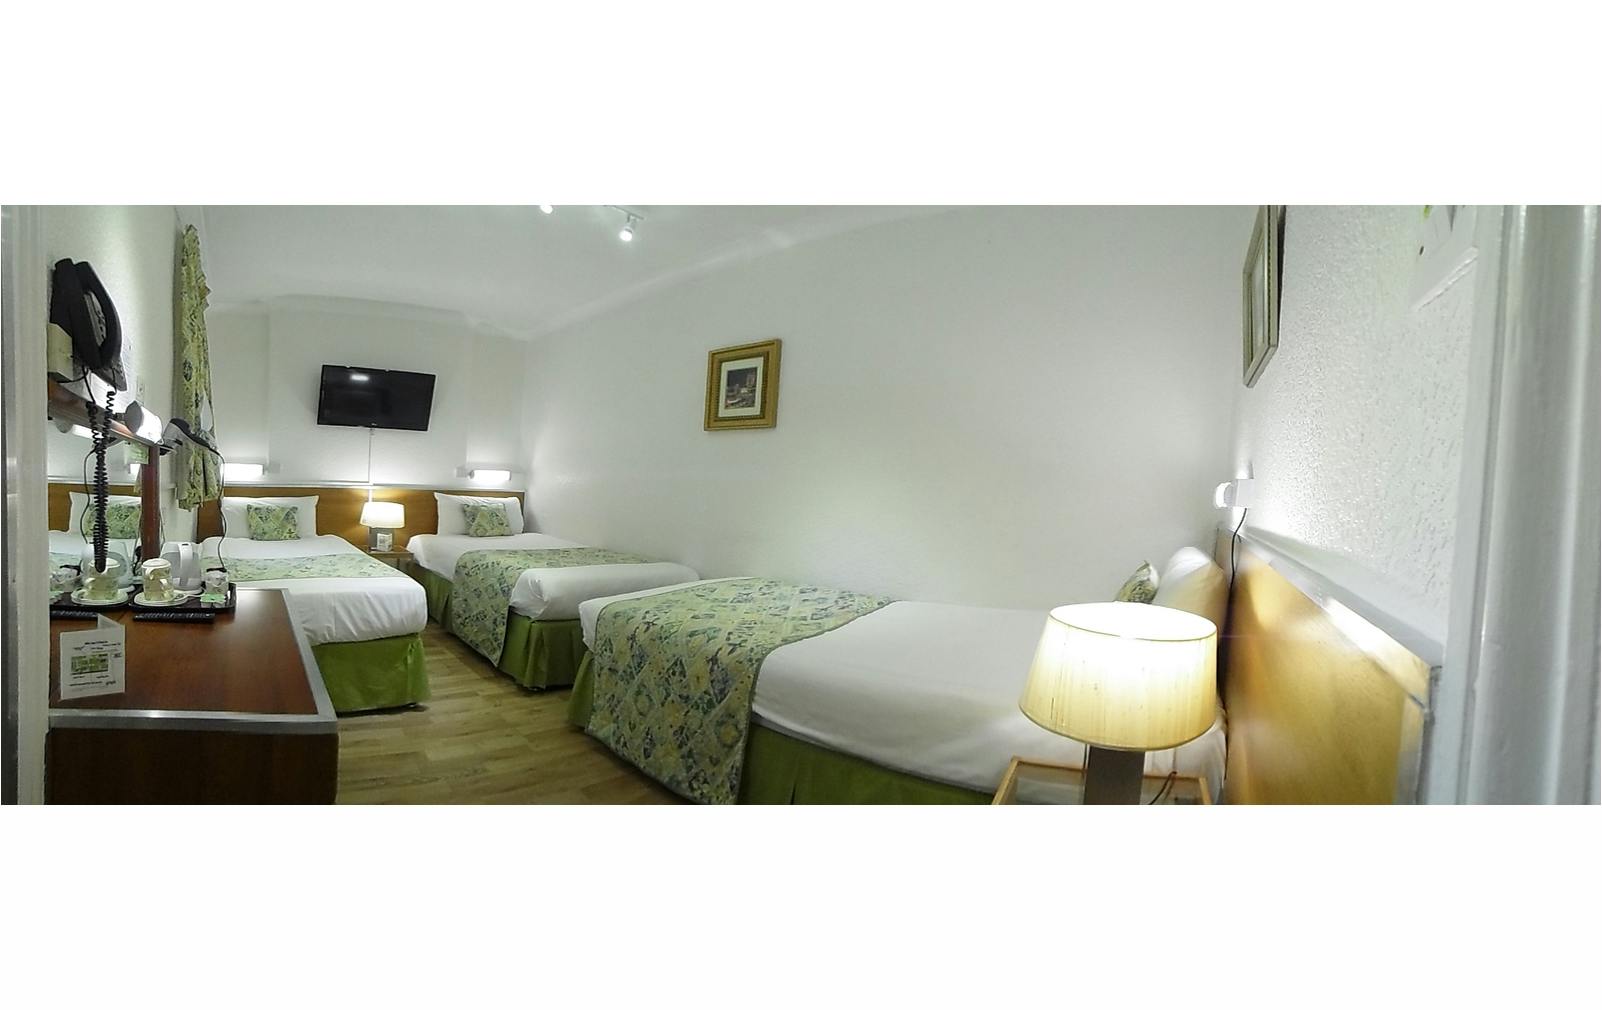 Boutique Hotel central London B&B Accommodation room for 3